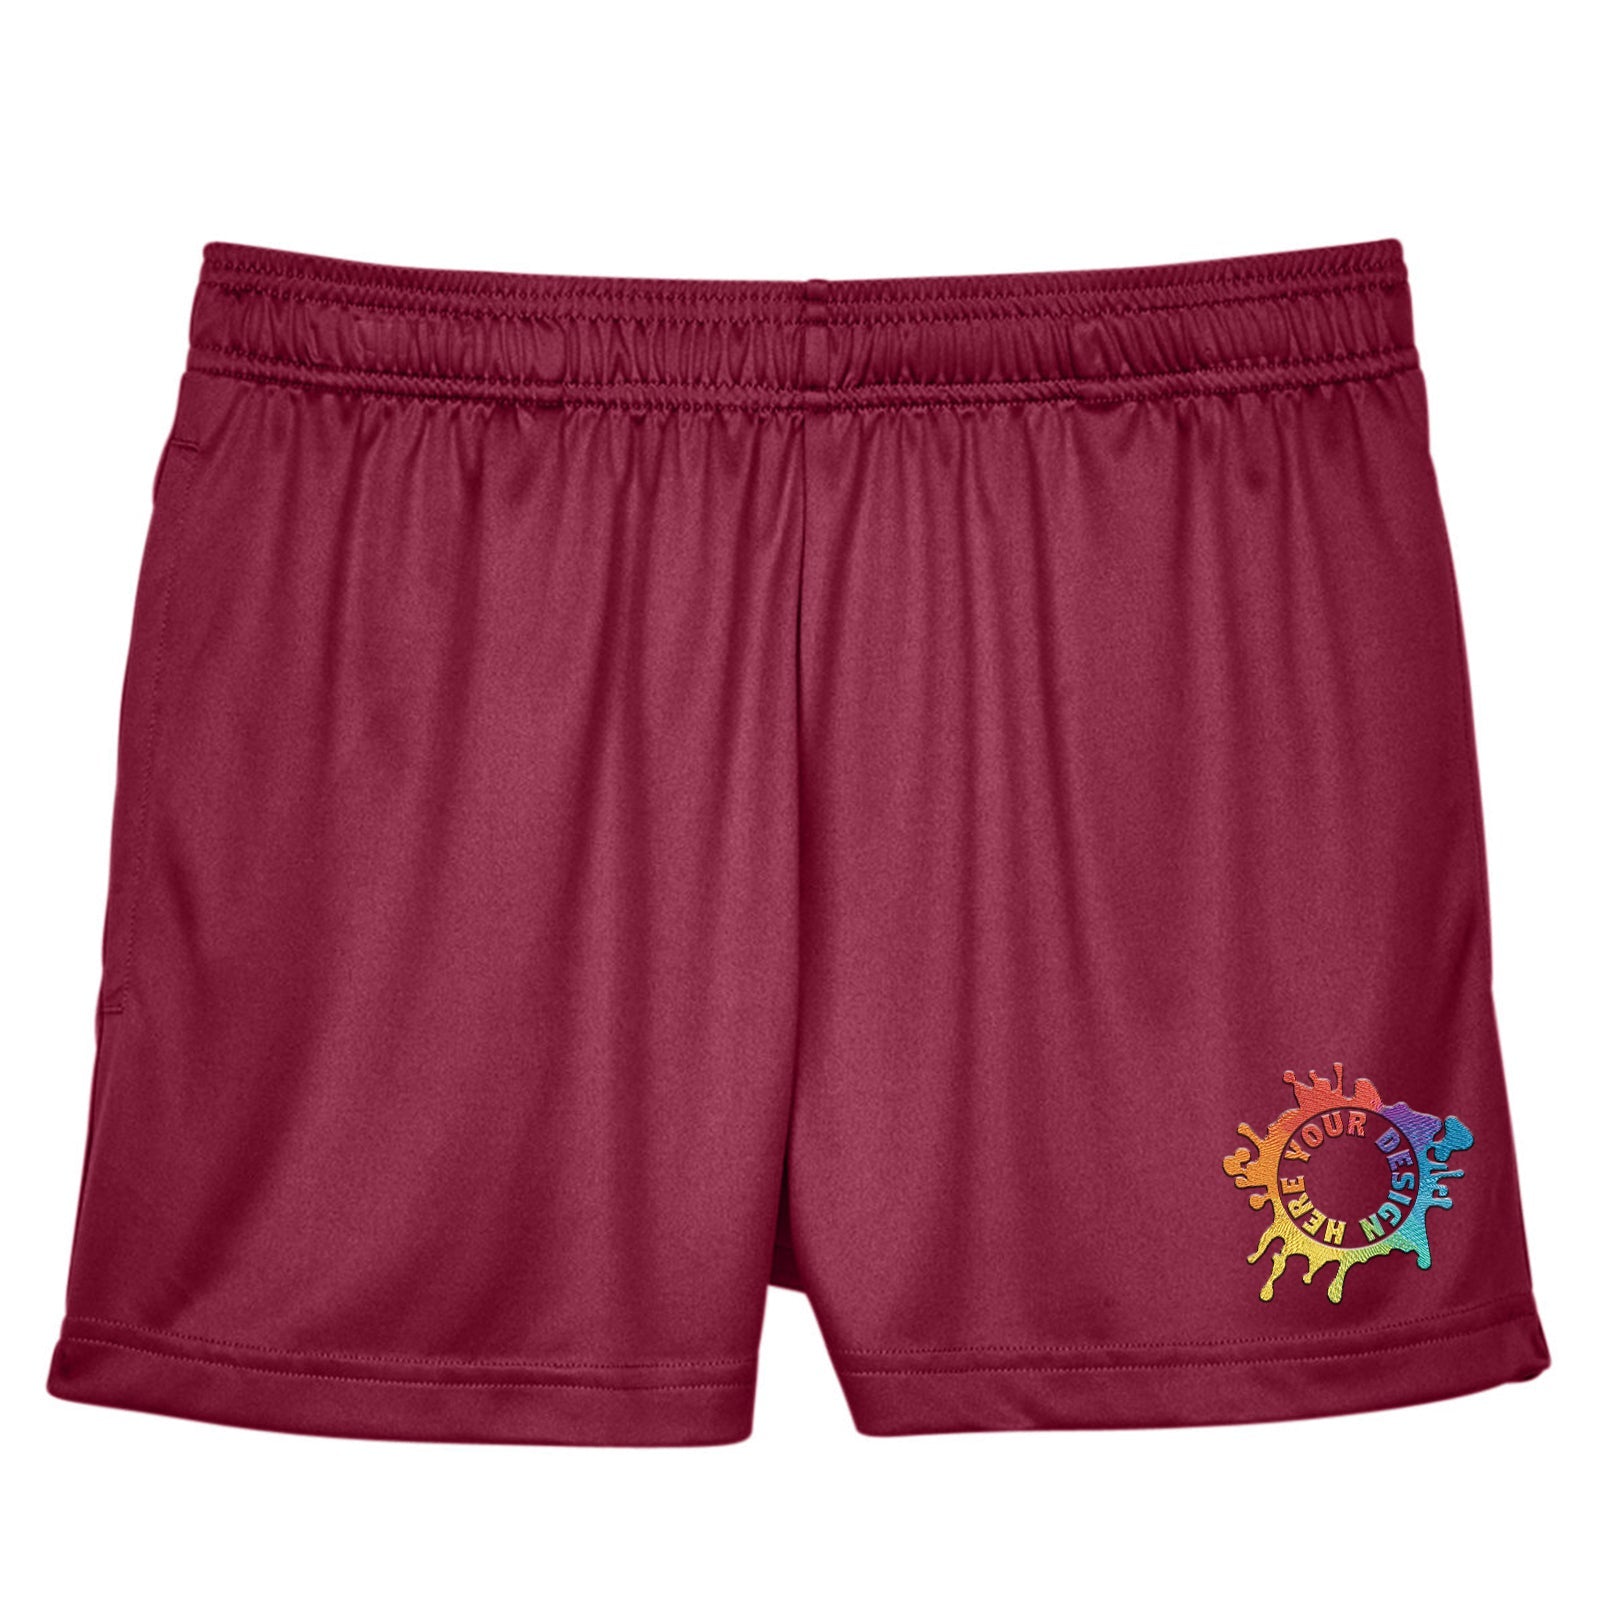 Team 365 Ladies' Zone Performance Shorts Embroidery - Mato & Hash